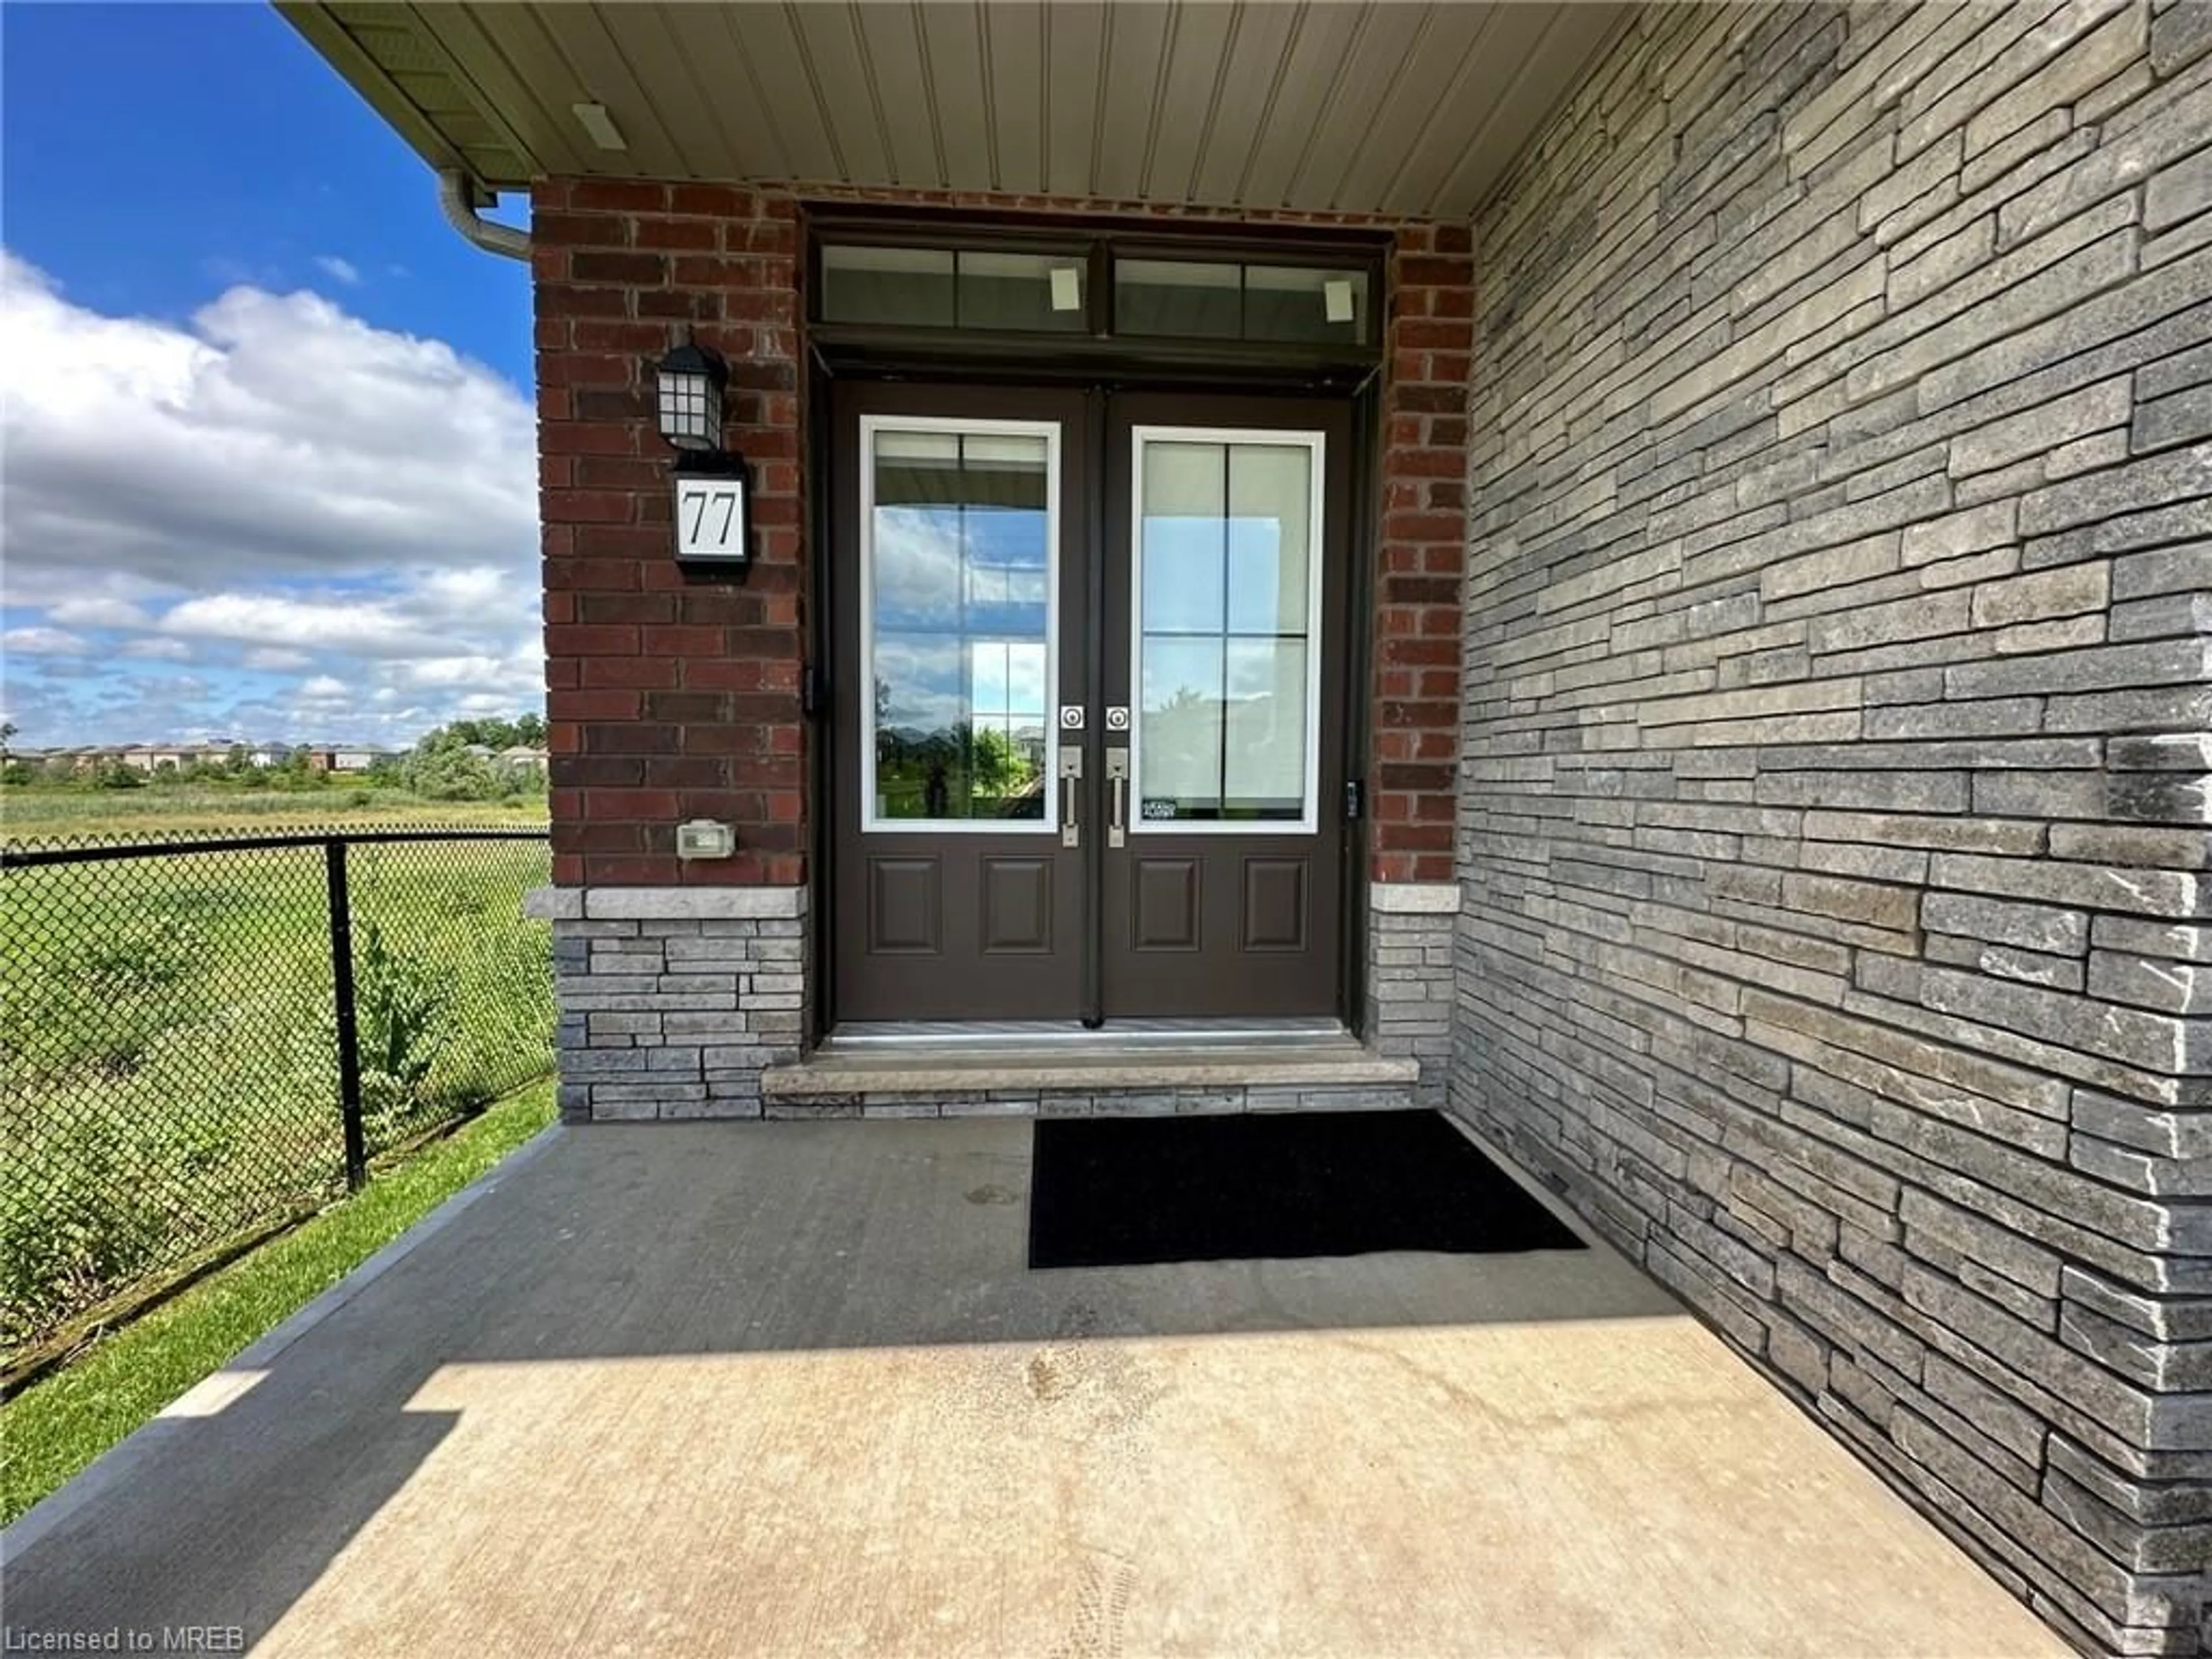 Home with brick exterior material for 77 Anderson Rd, Brantford Ontario N3T 0S2